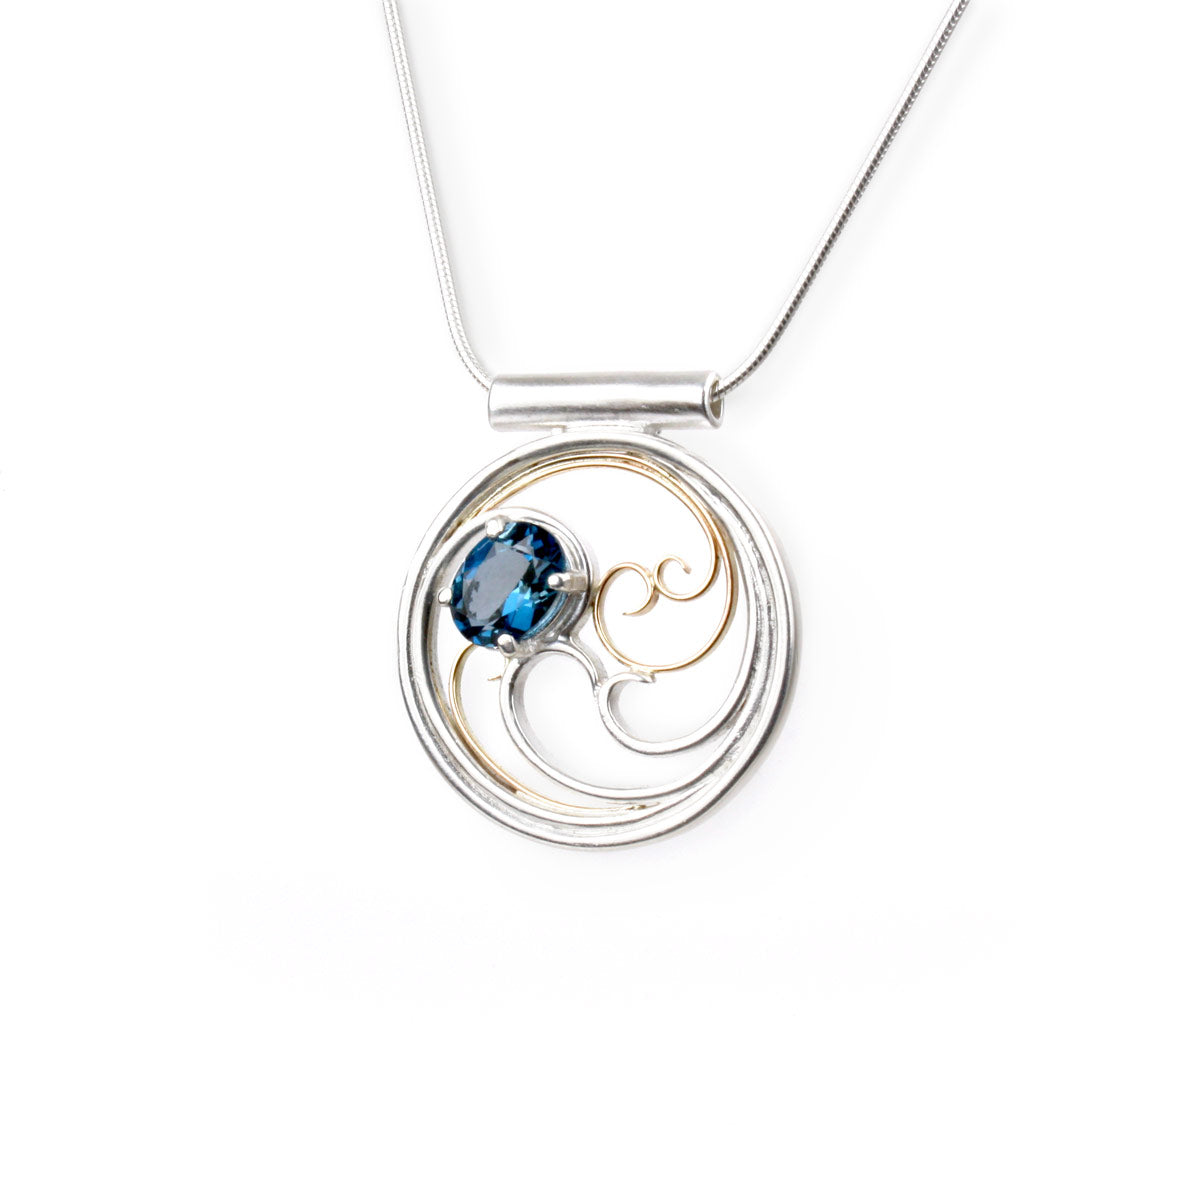 A circular pendant with cascading silver and gold waves encircling a deep blue oval topaz gem.